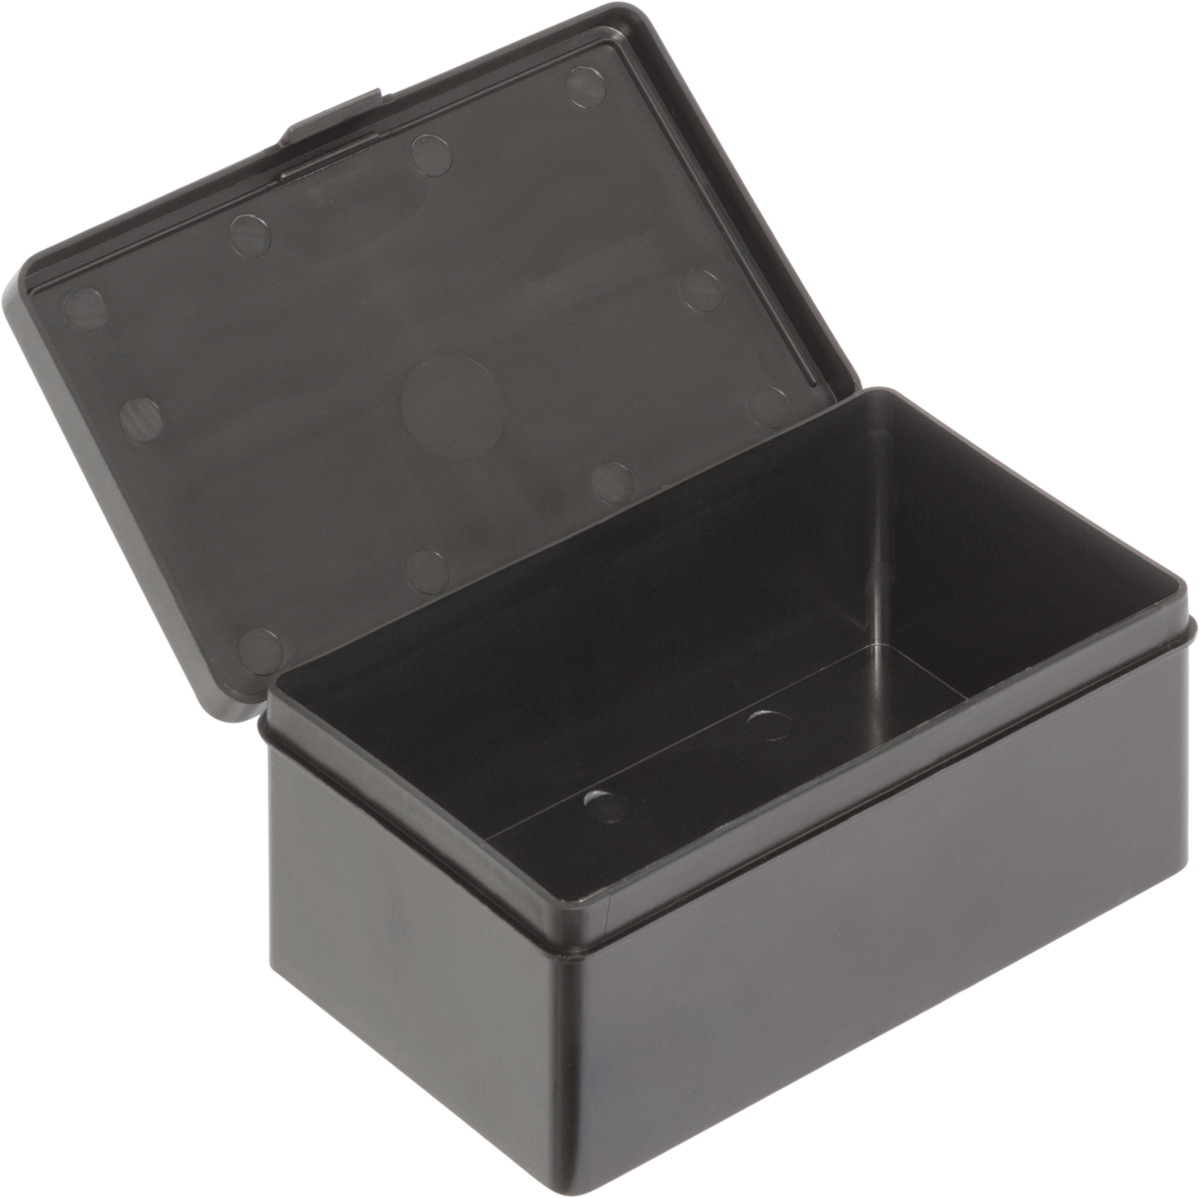 Anti-Static-ESD-Antistatic-Lidded-Box-with-Hinged-Lid-H55mm-flat-base_Ref.-1308.050.992_1004154_136x87x55_01_open